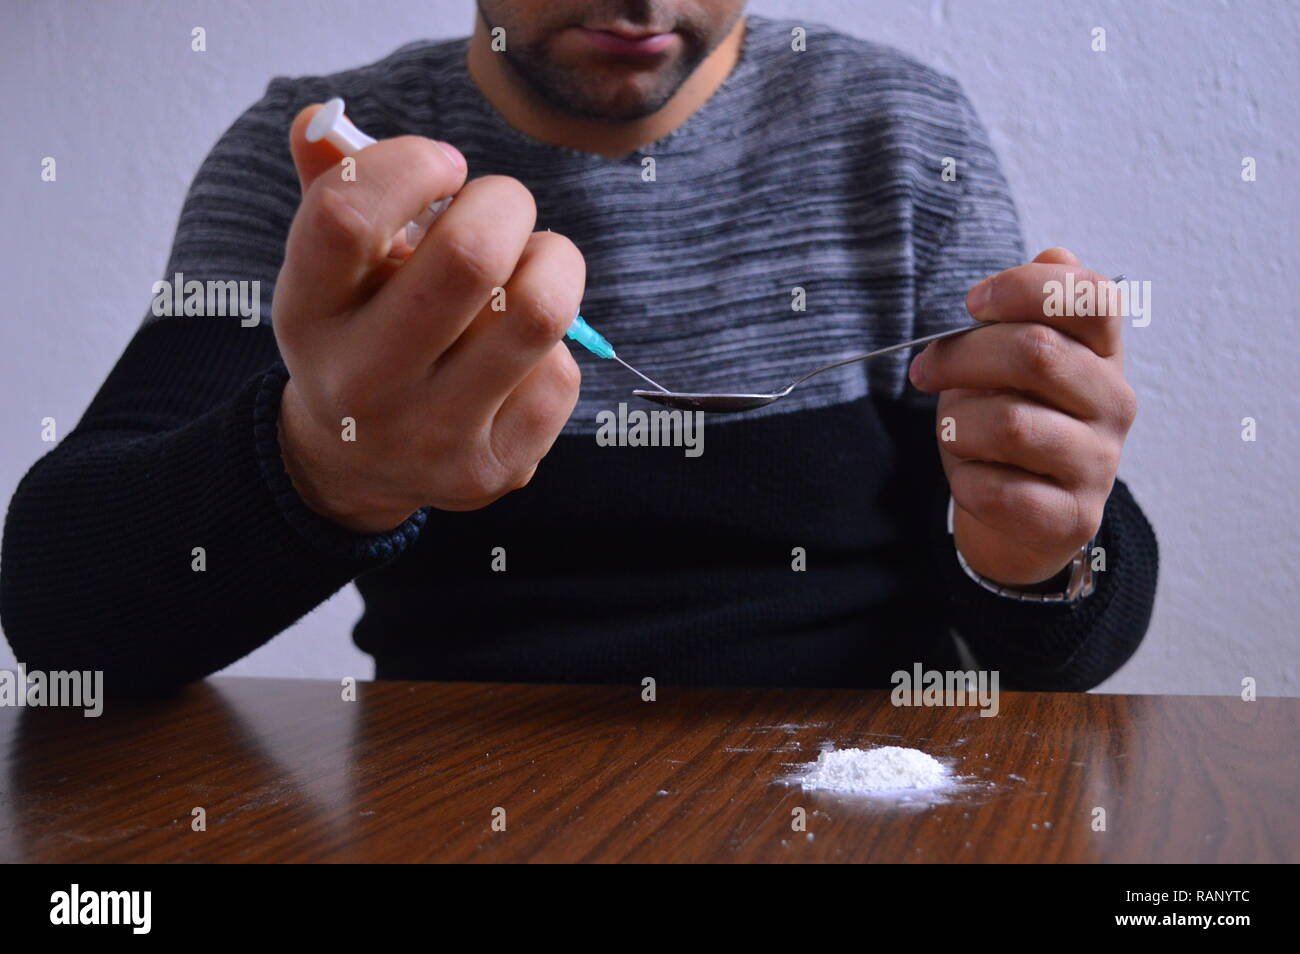 A person injecting a drug in his arm with a syringe Stock Photo